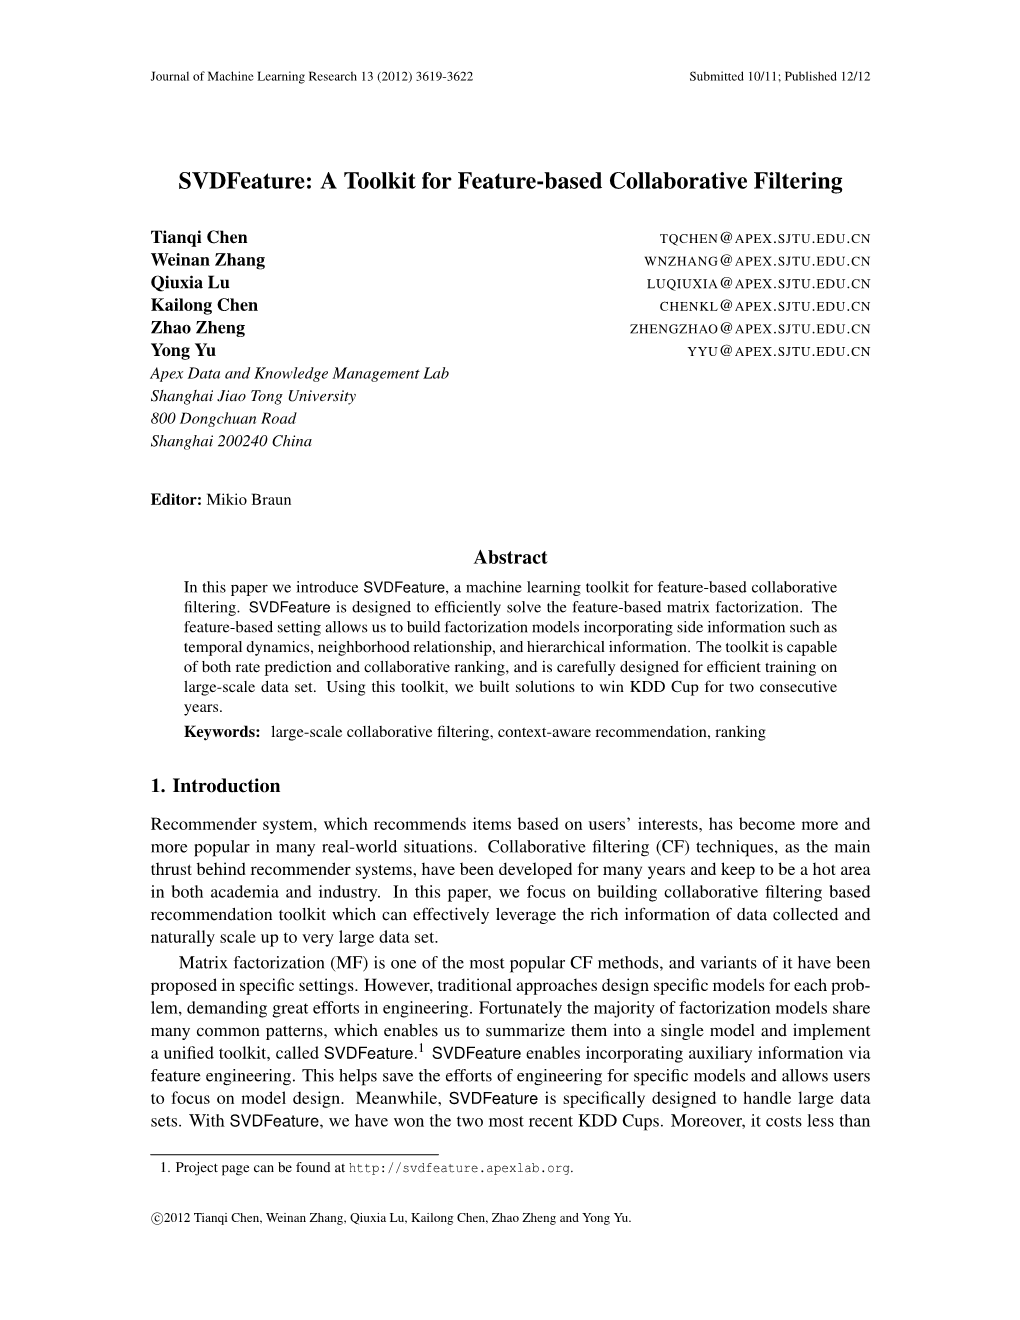 Svdfeature: a Toolkit for Feature-Based Collaborative Filtering